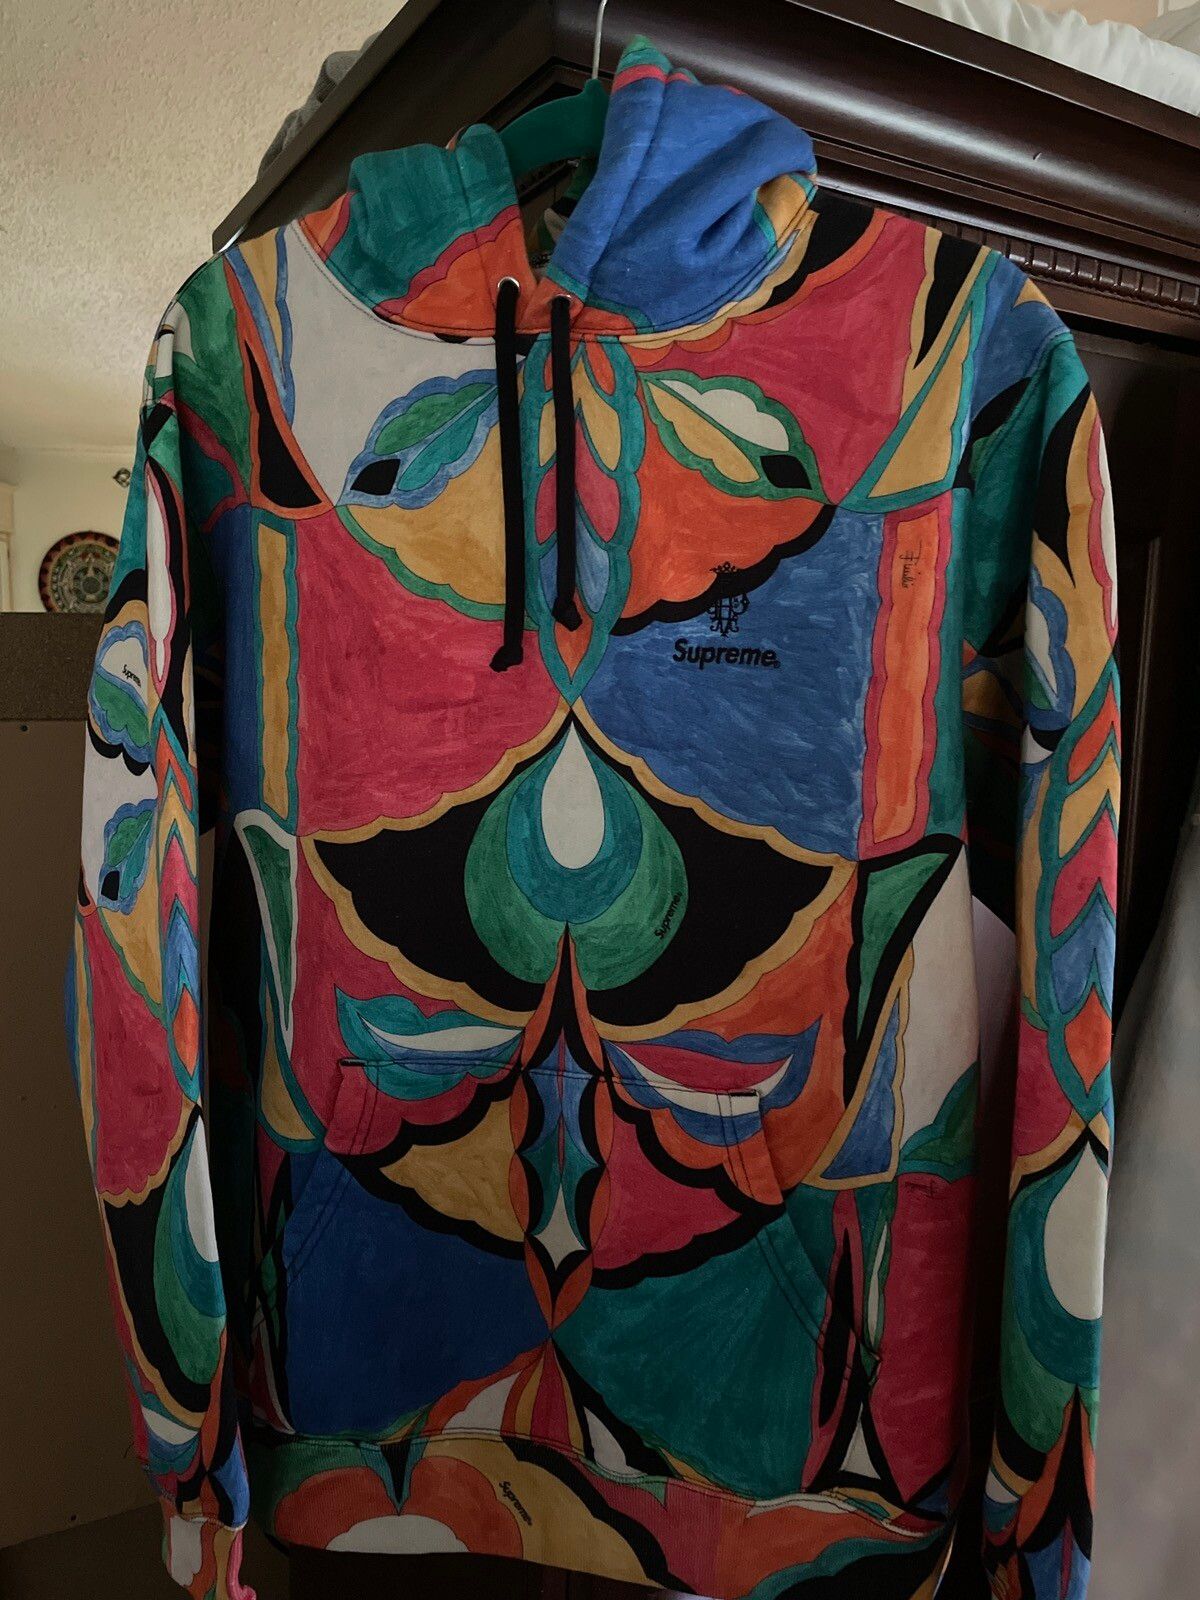 Supreme X Emilio Pucci Hooded Sweatshirt SZ M SS21 Collab - CONFIRMED  PURCHASE